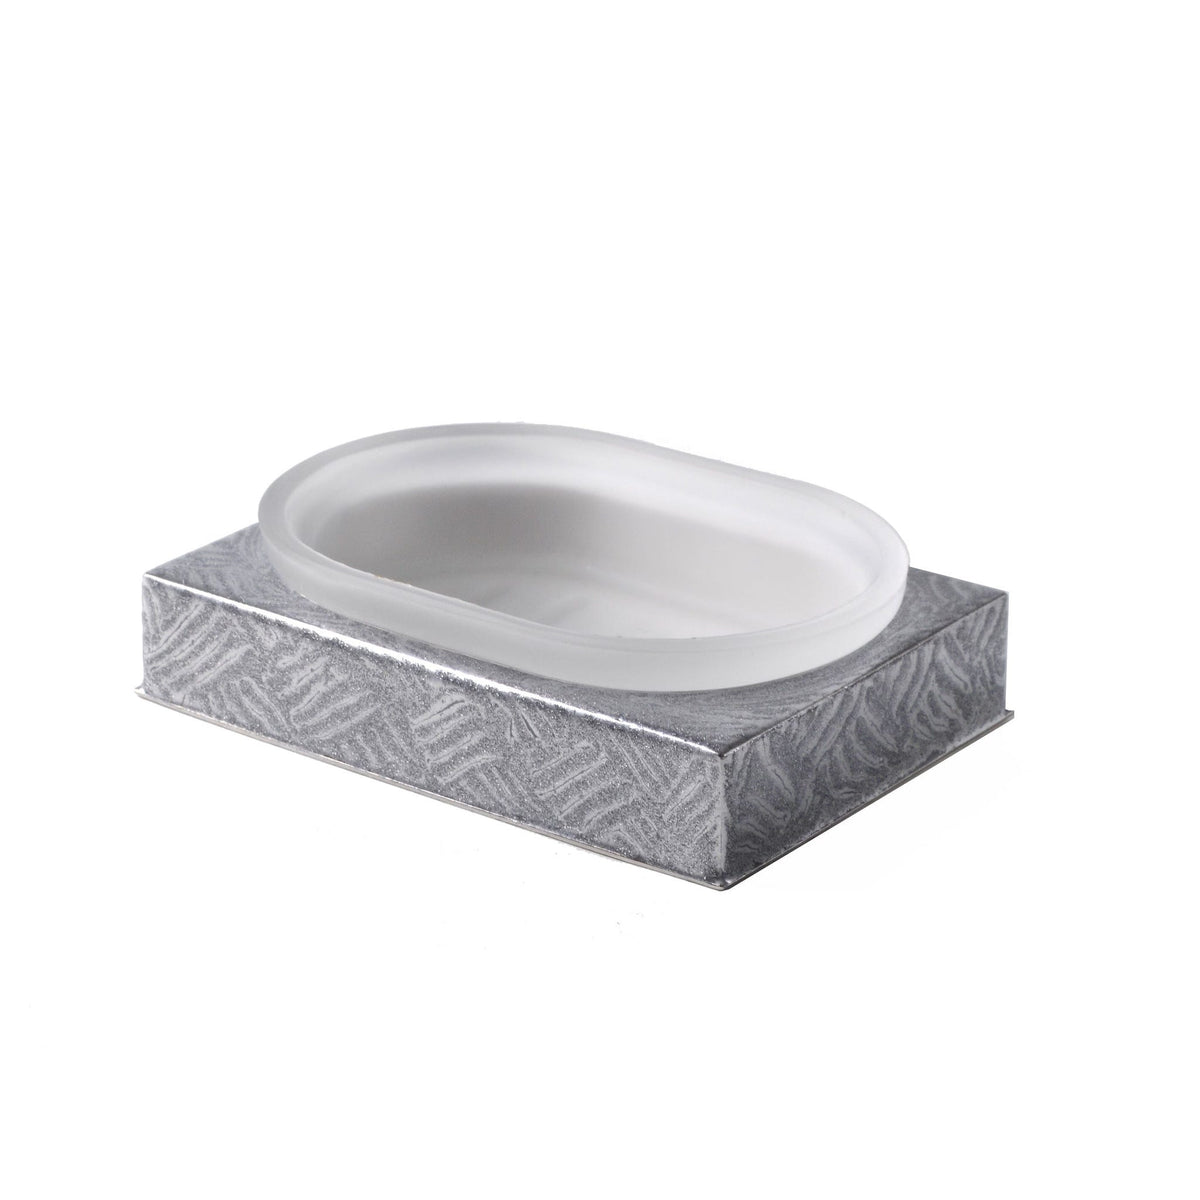 Mike and Ally Tilly Bath Accessories Metallic Silver Soap Dish